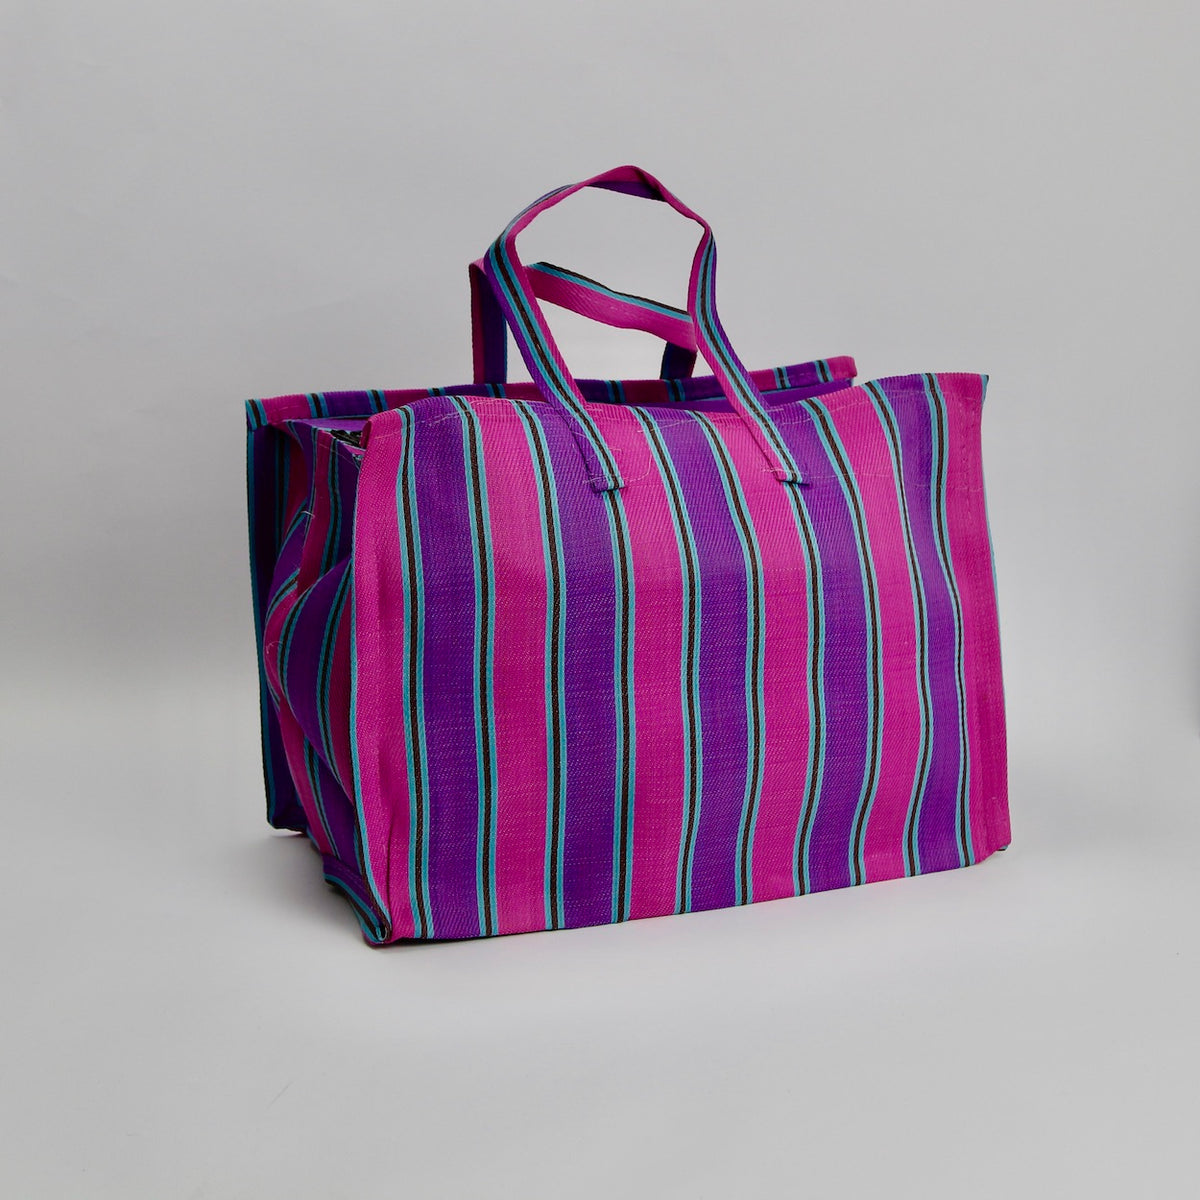 Size 4 Striped Market Bag with Long Handles - Violet/Hot Pink/Baby Blue/Chocolate